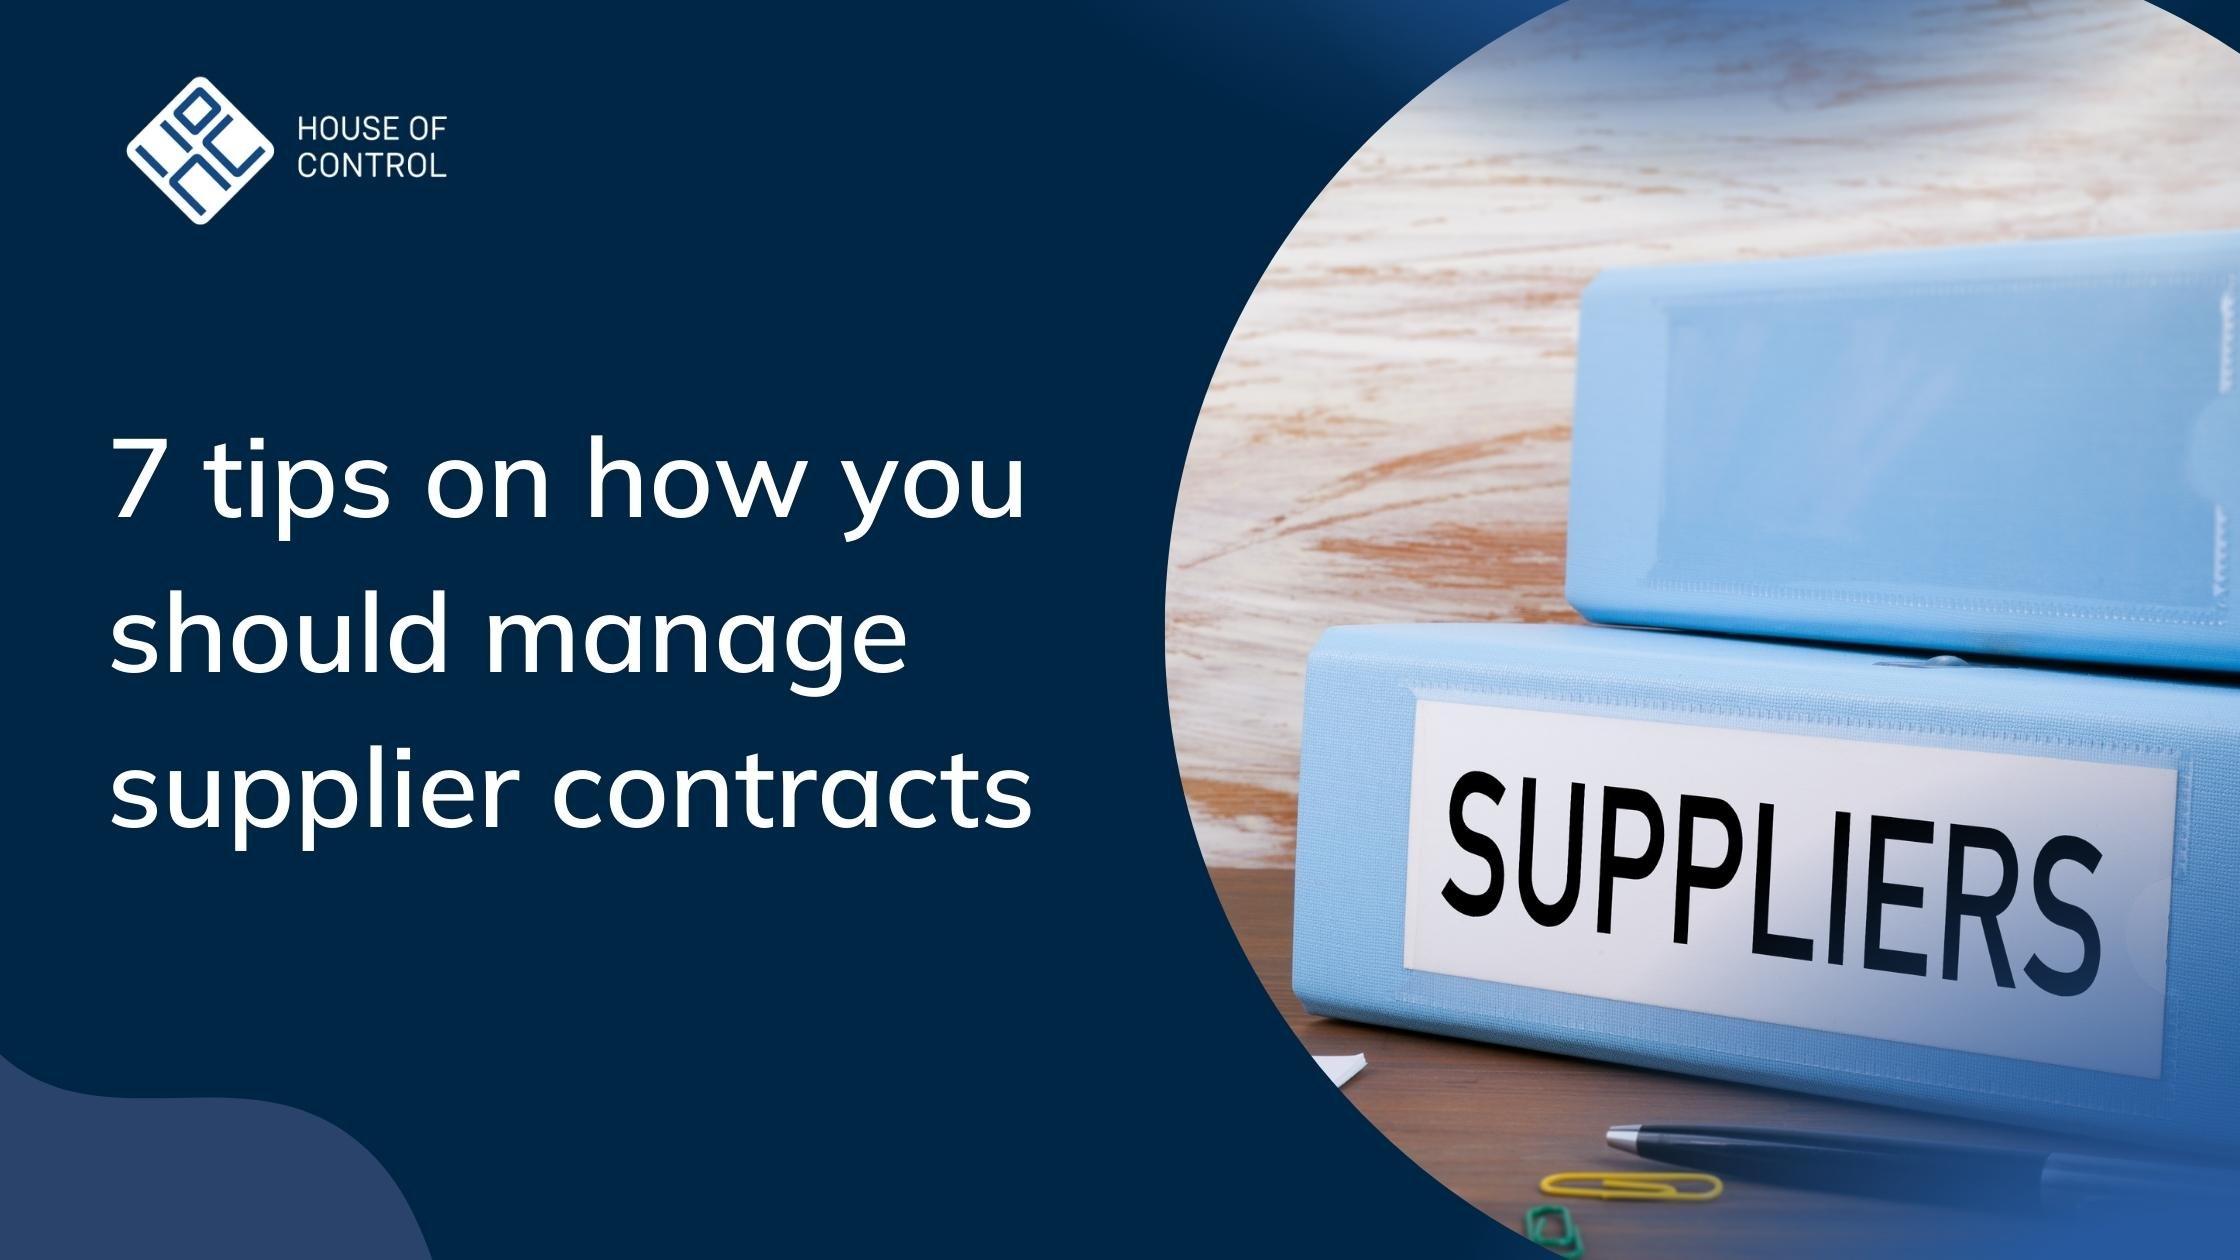 7 tips on how you should manage supplier contracts